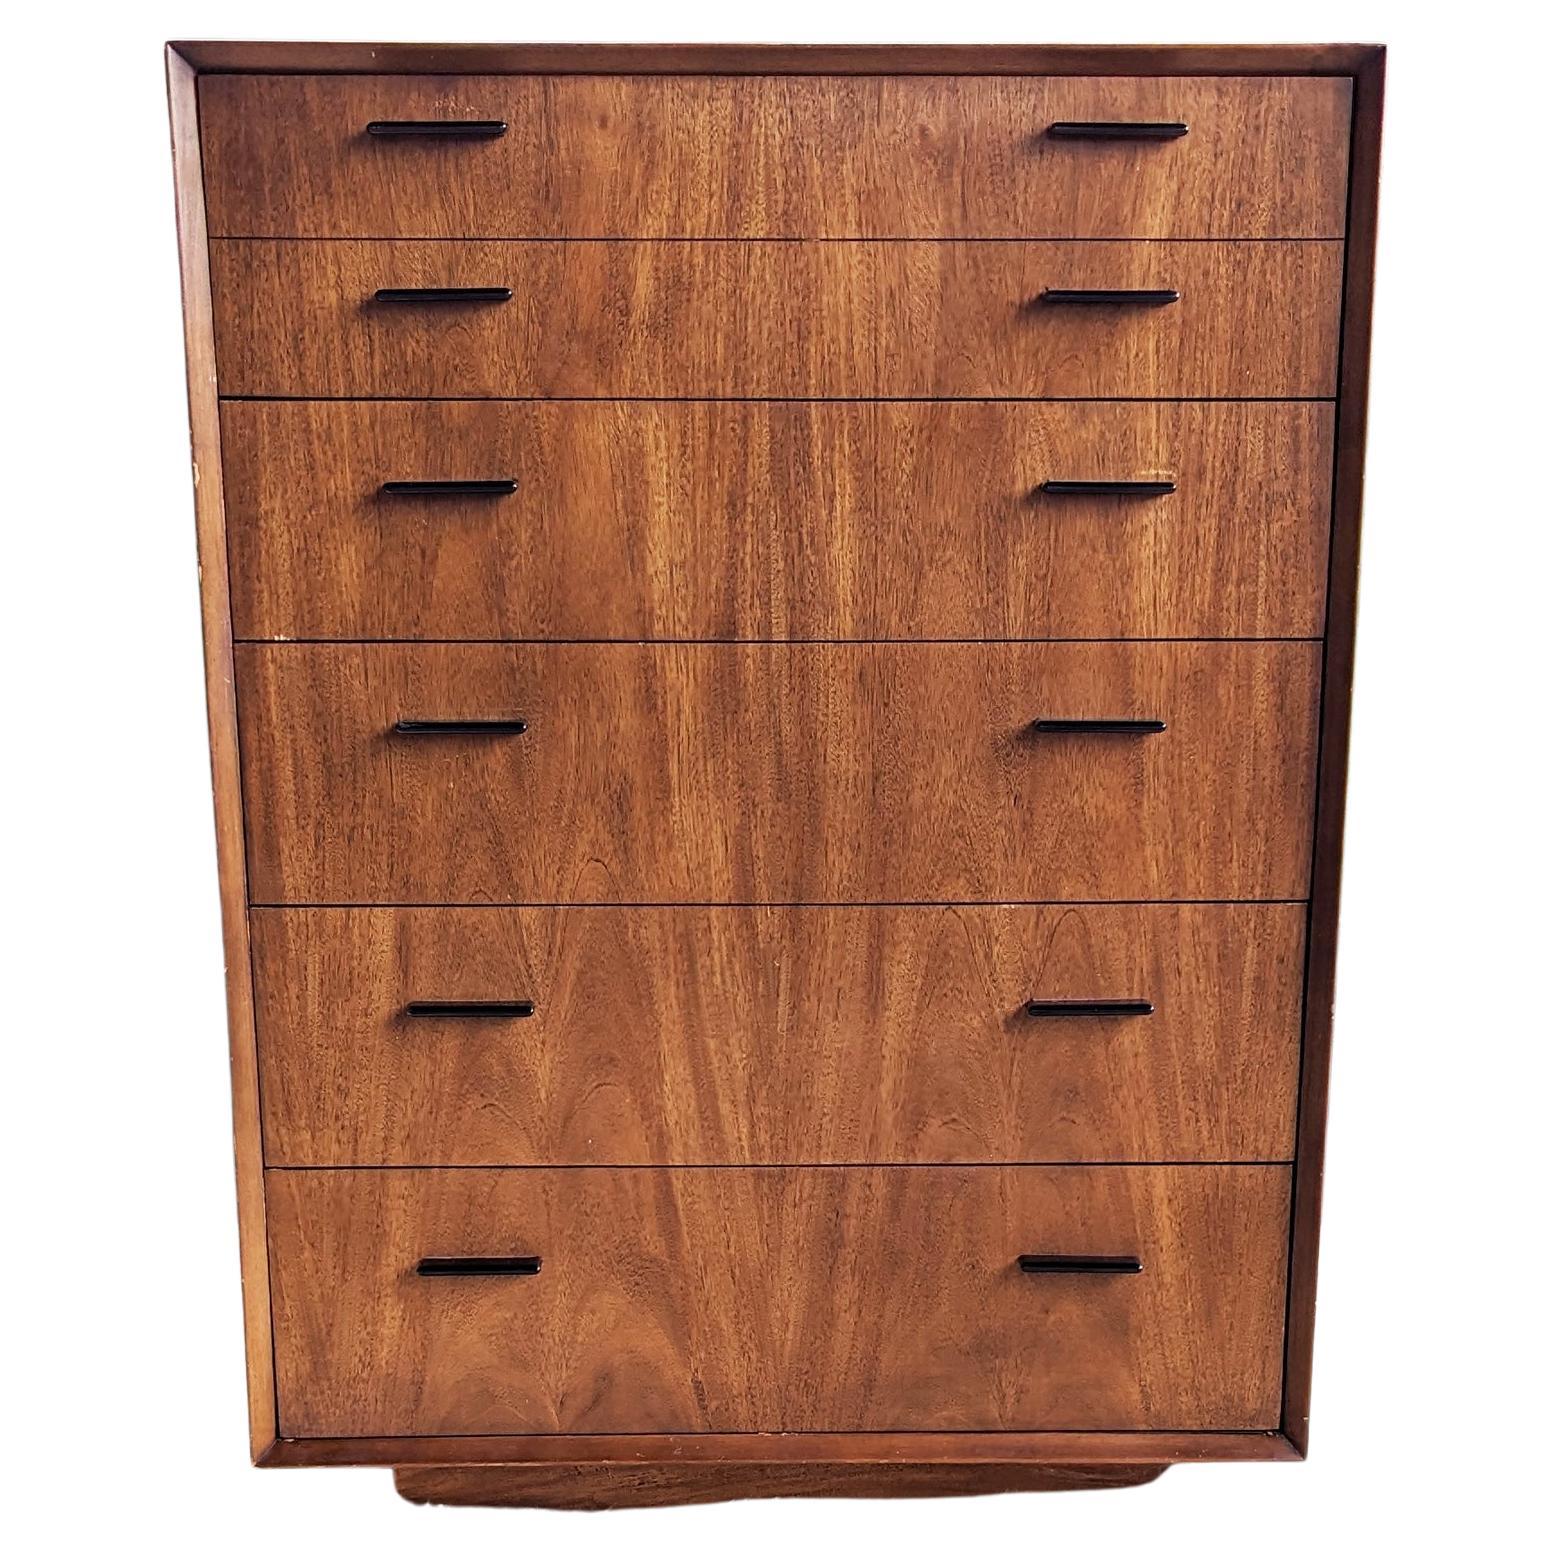 Very nice looking and functional high quality Brutalist Lane dresser. The drawers catch on rollers. In very good condition throughout.

Very nice drawer pulls, beautiful minimalist piece, Very cool design.

Dimensions: 36